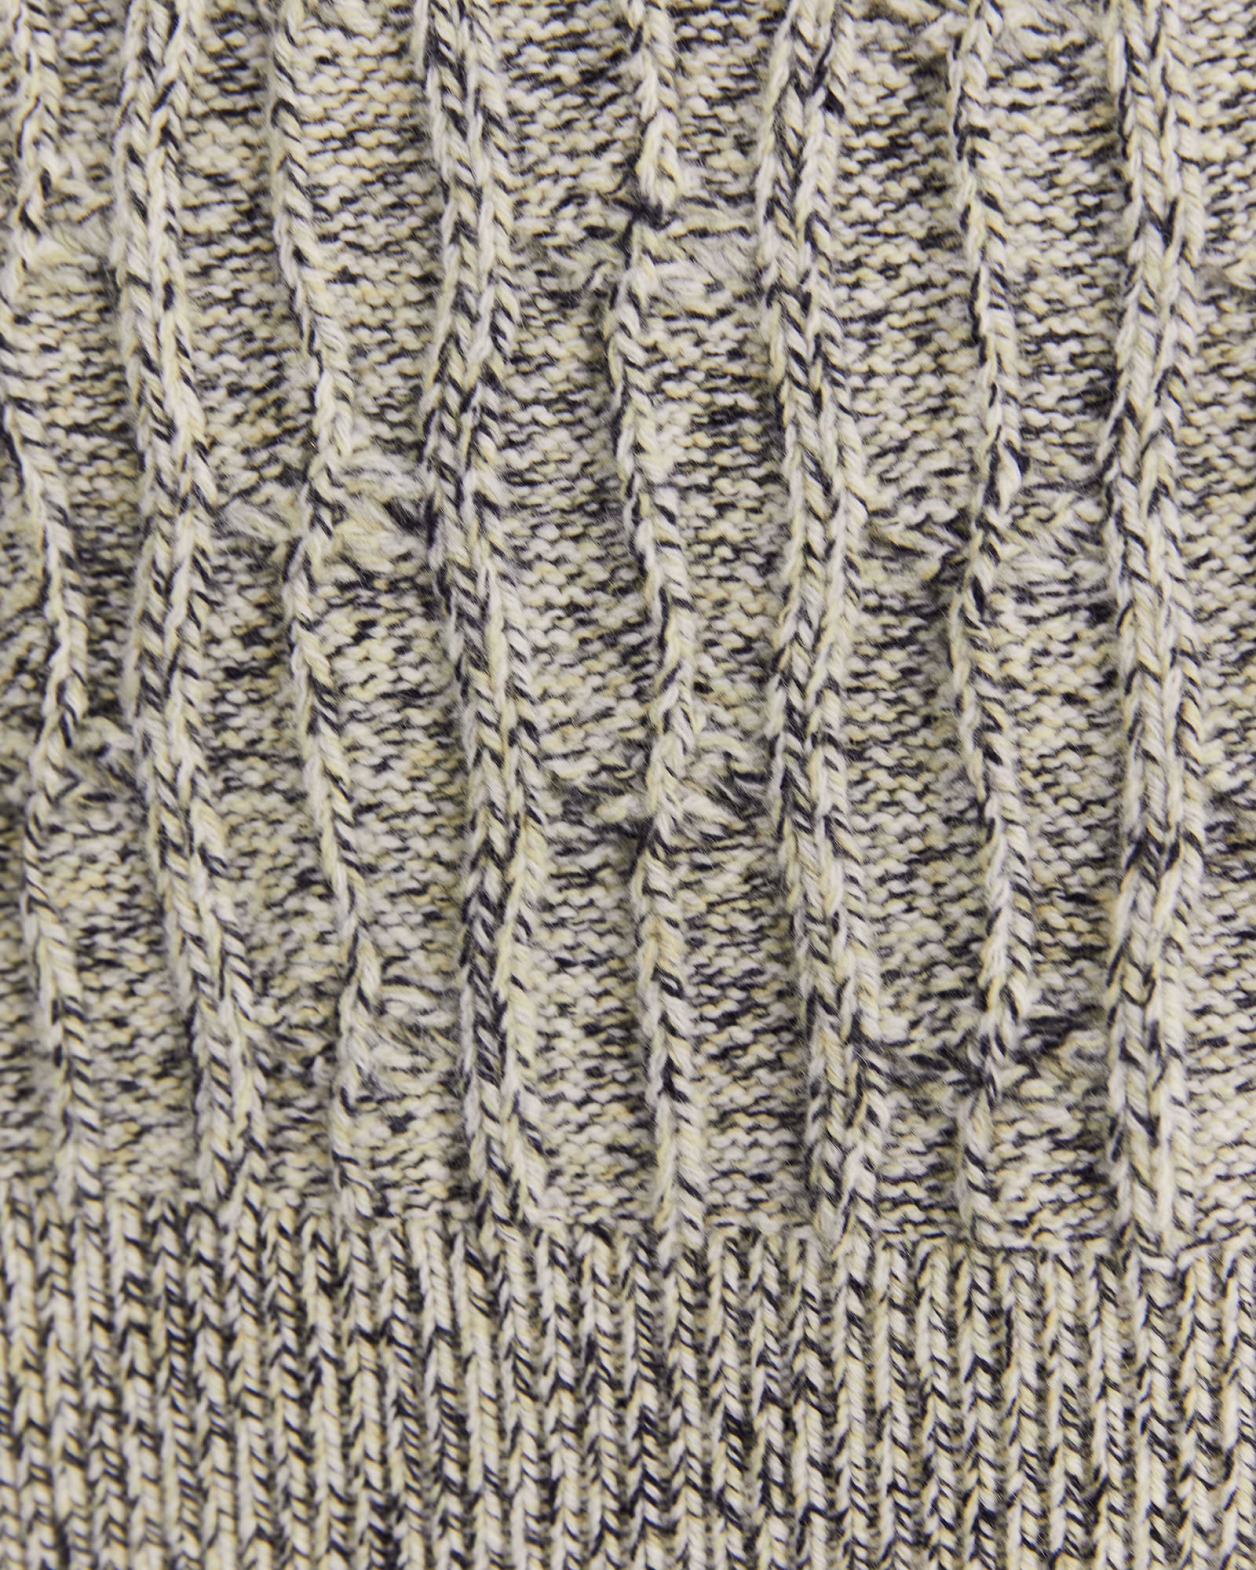 Marlow Wool Cable Scarf in ZEST